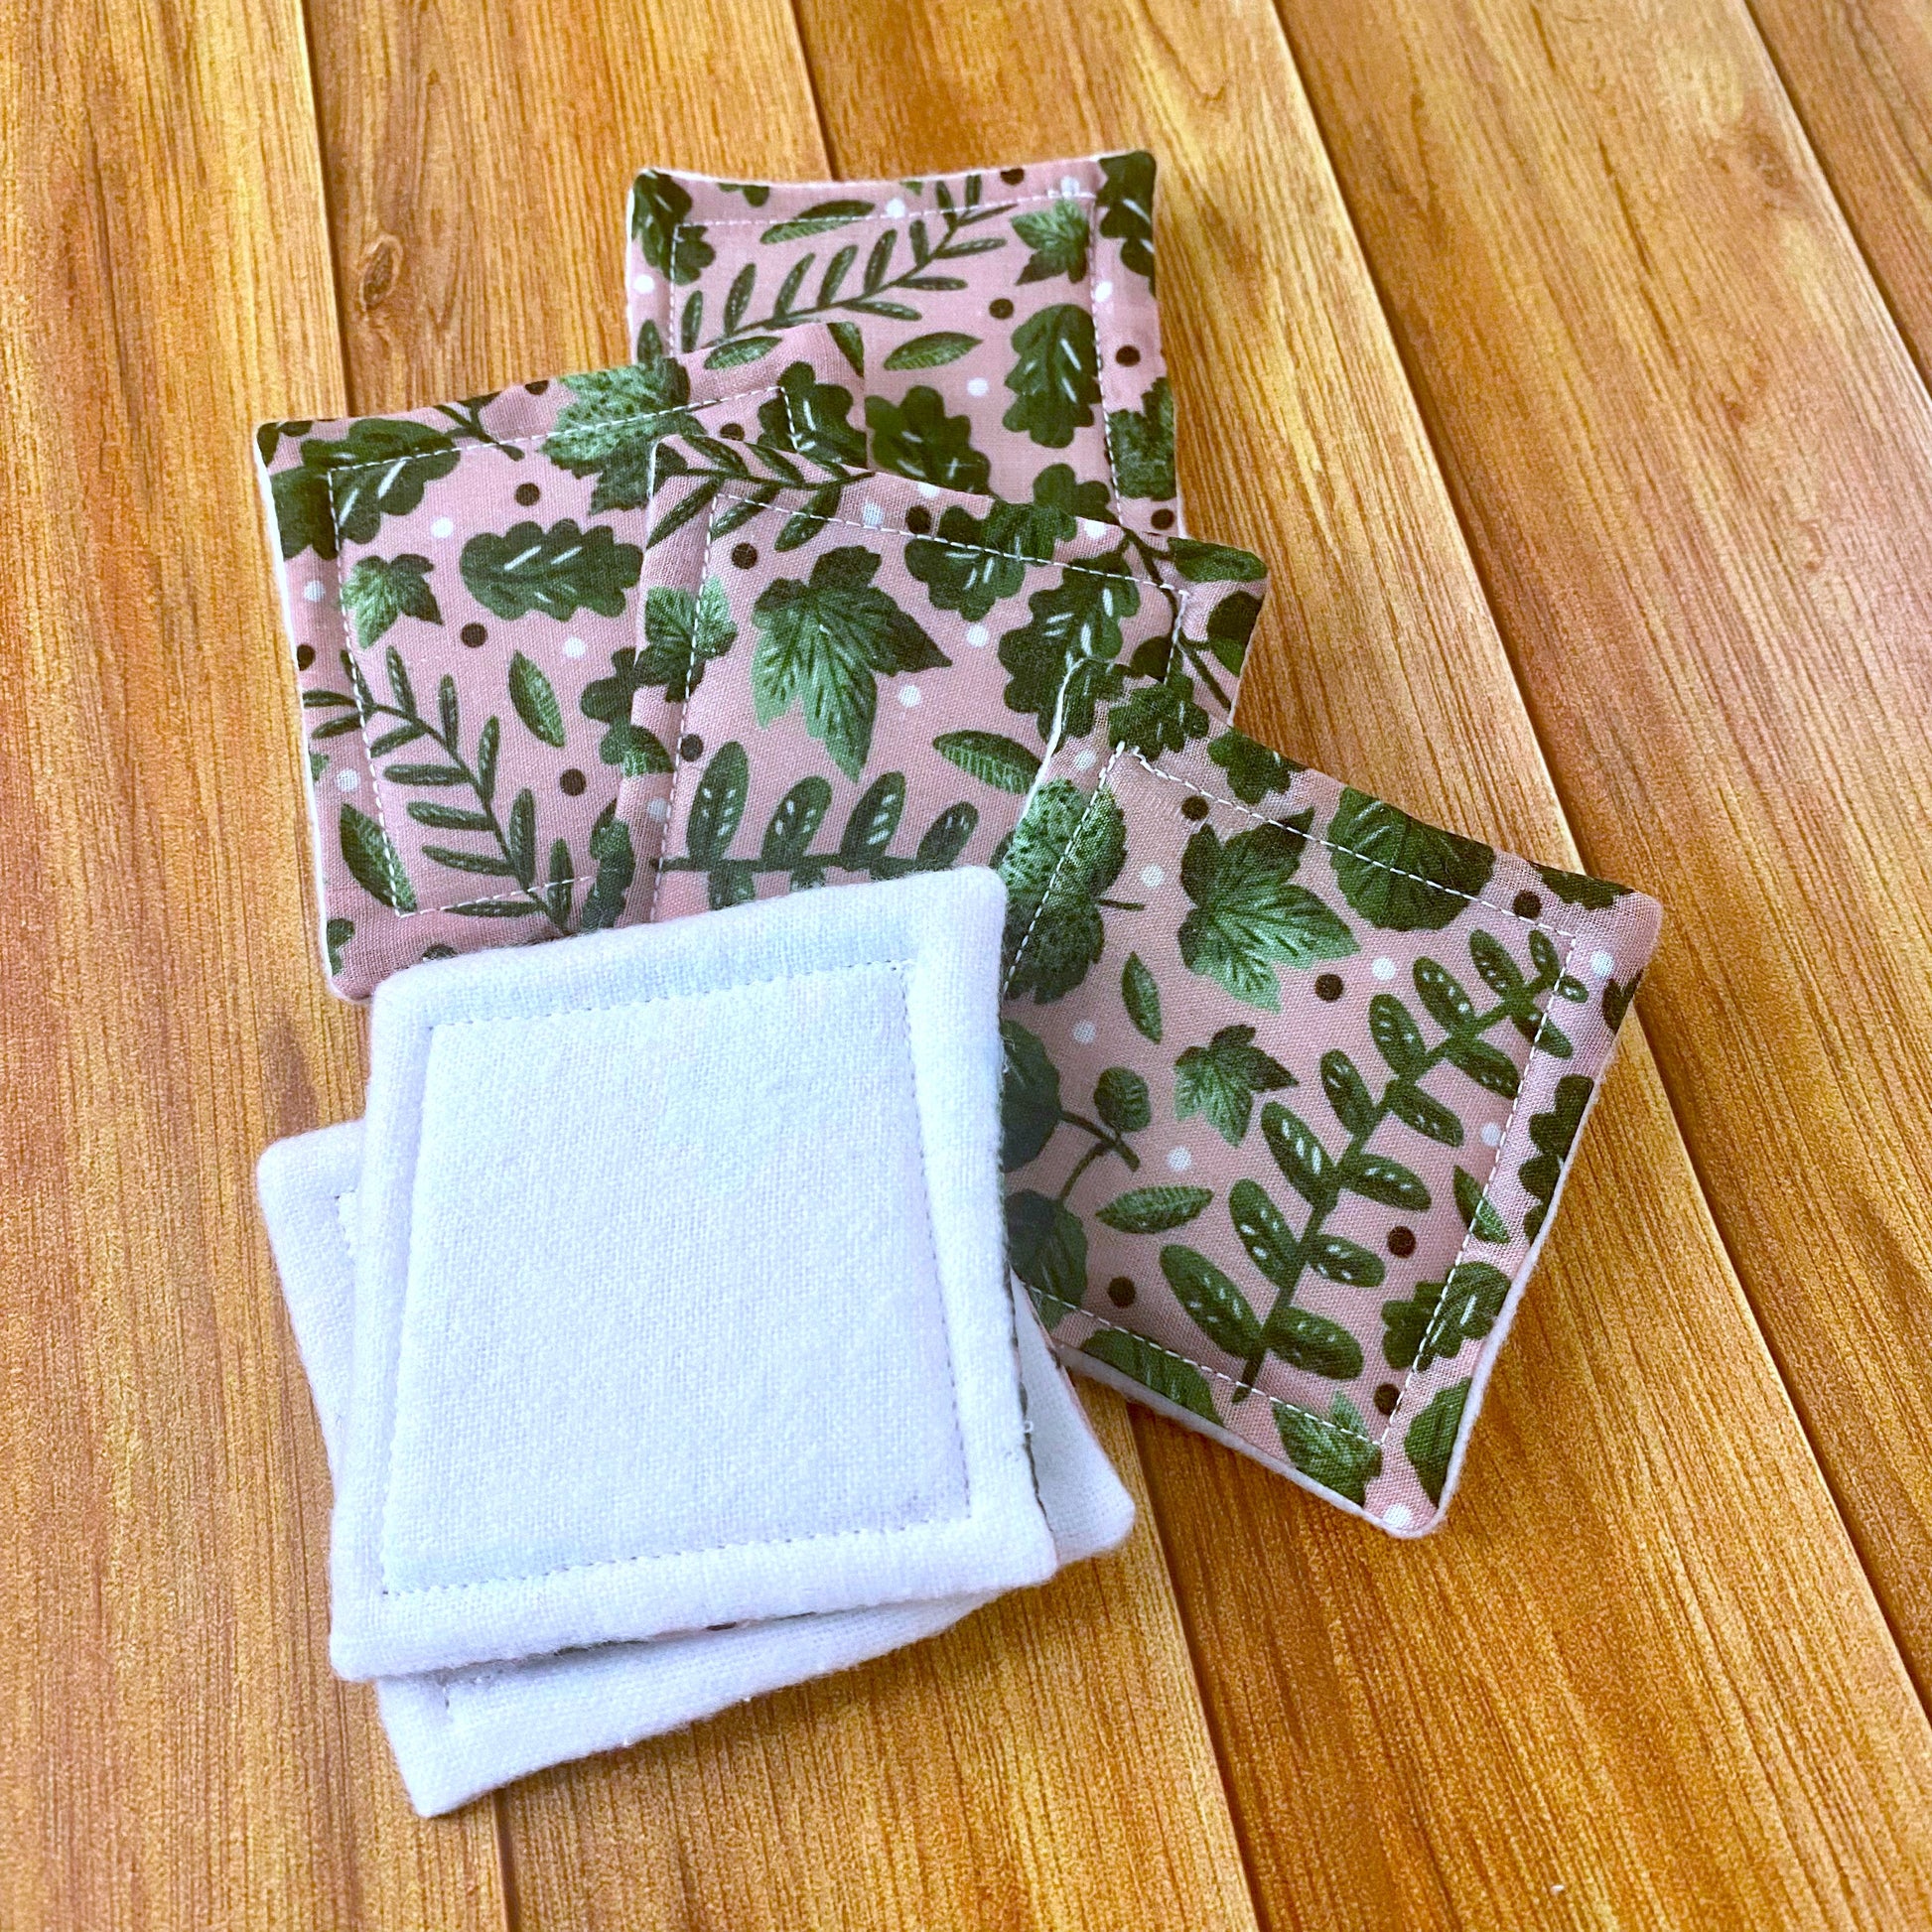 Green foliage patterned skincare pads laid out on a wooden surface, showing two flipped over to the white brushed cotton side